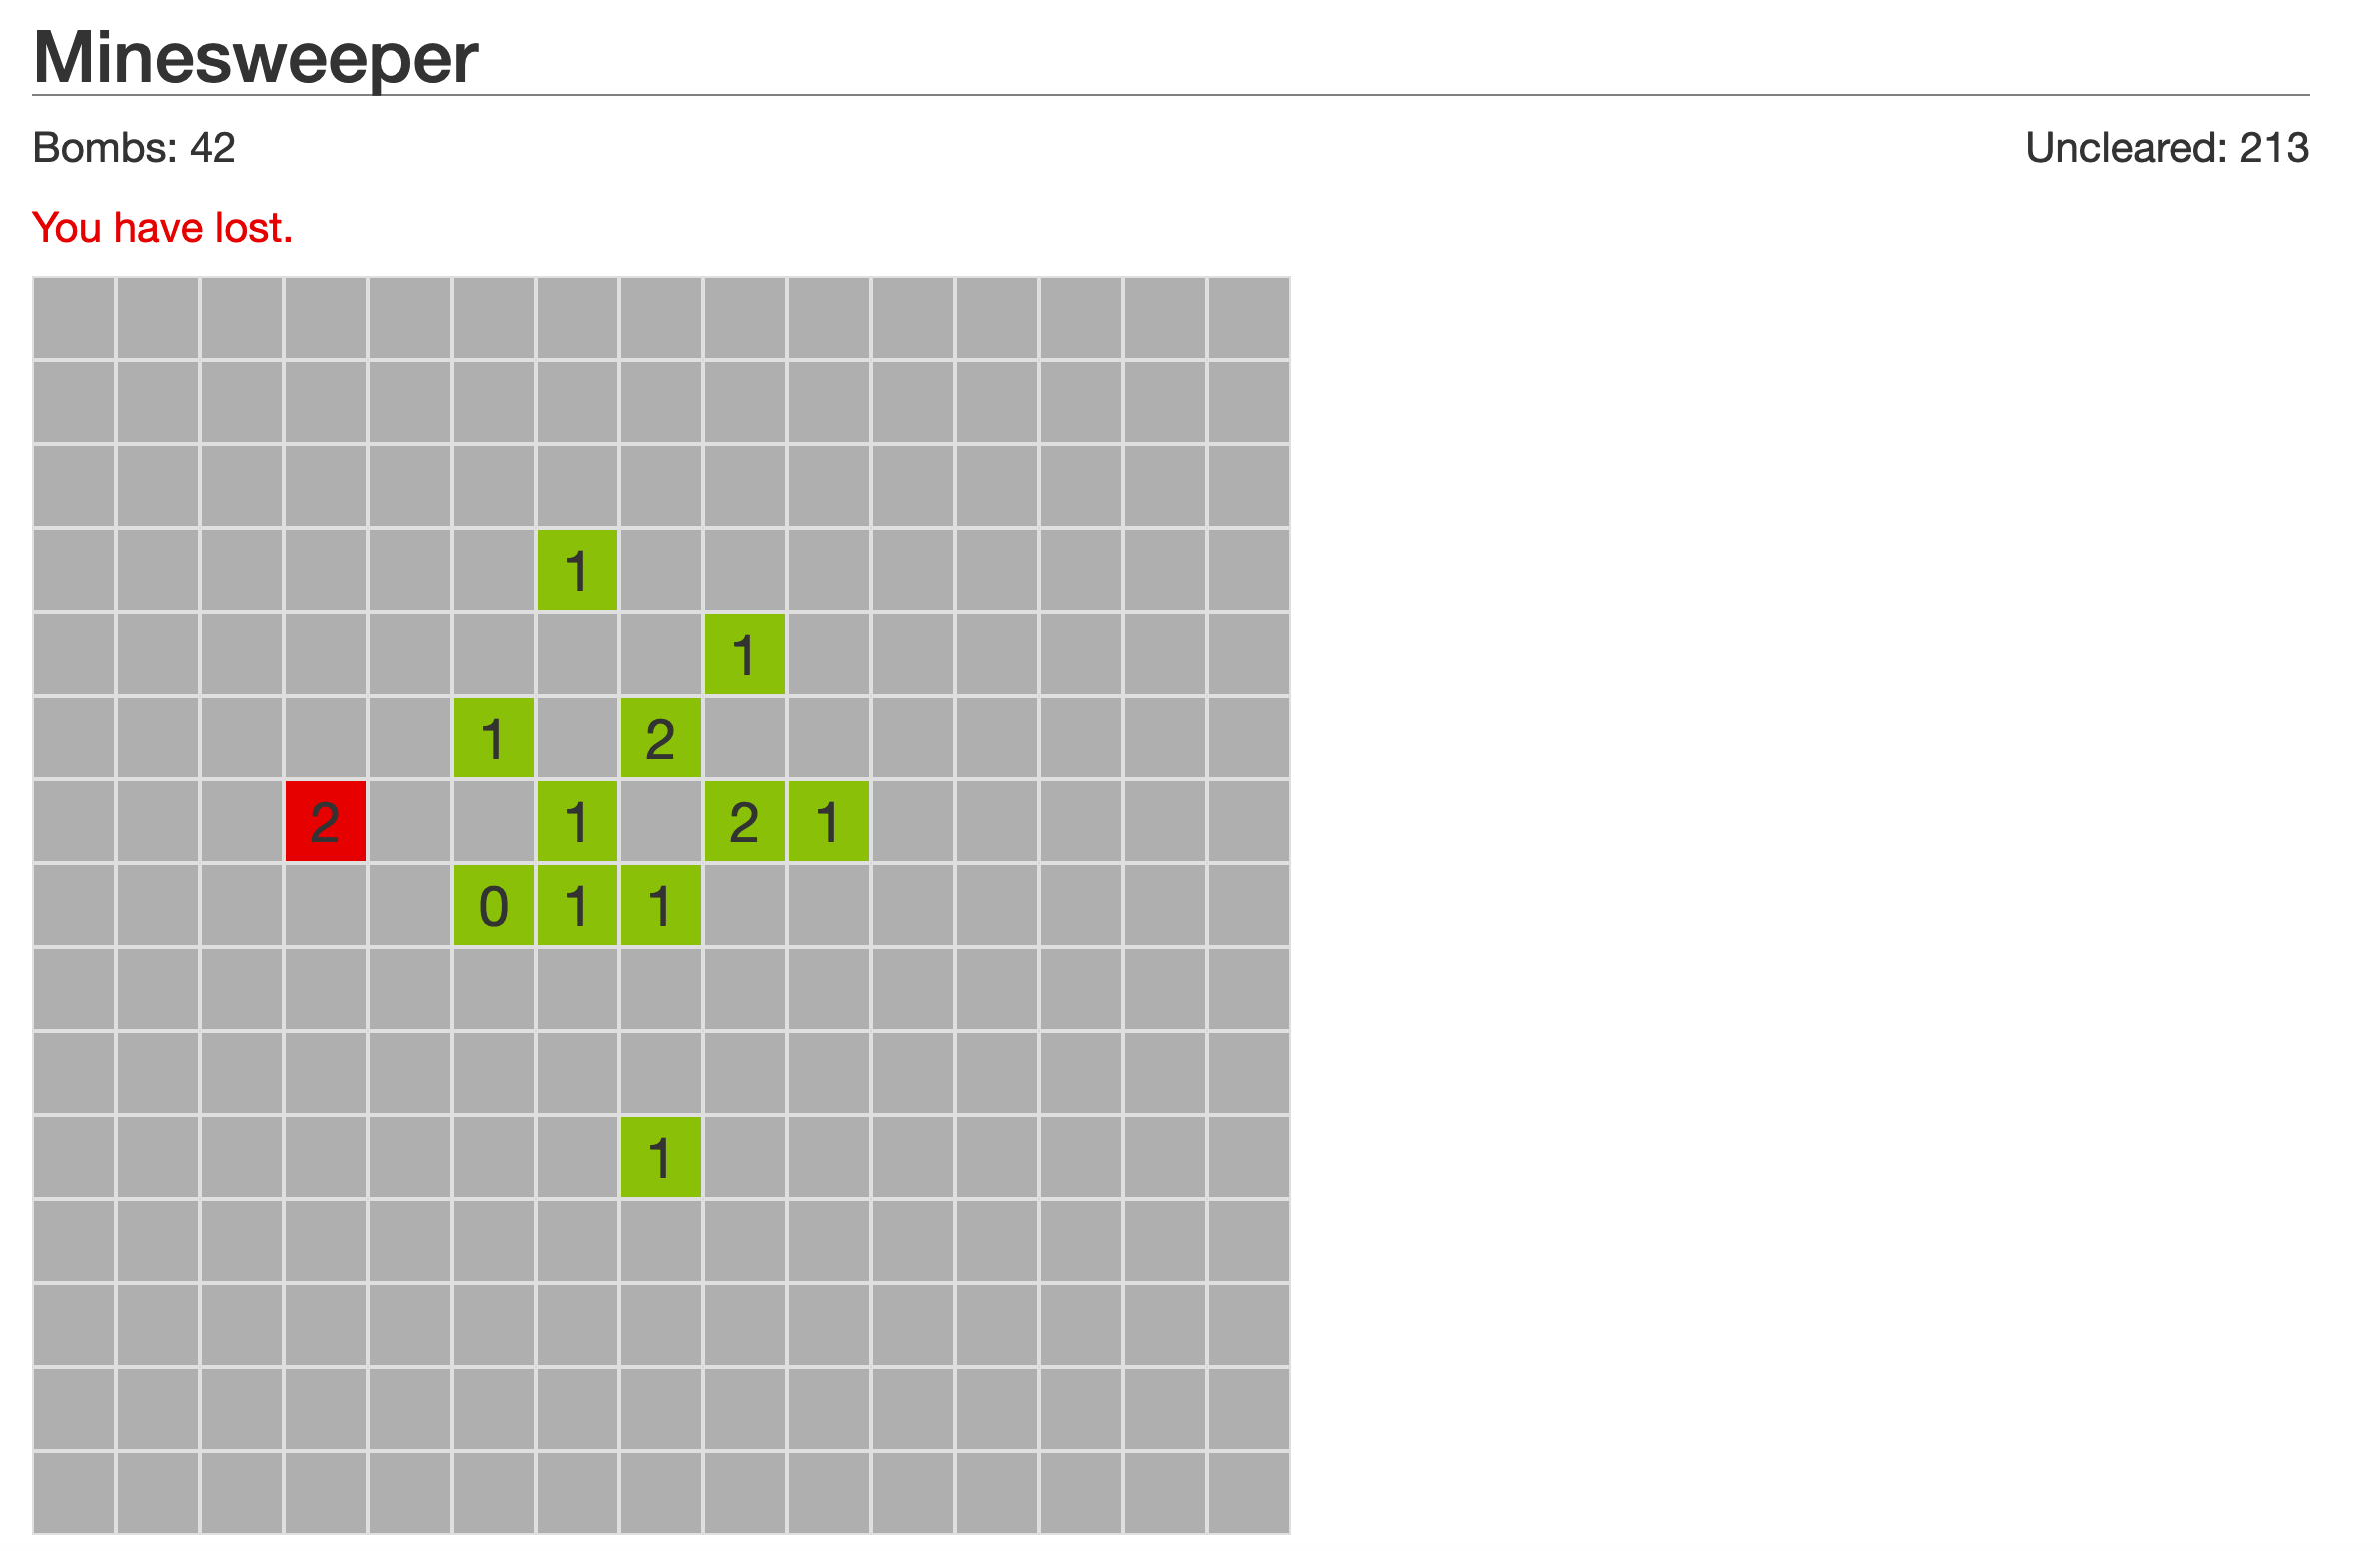 Traditional Minesweeper layout with a losing record